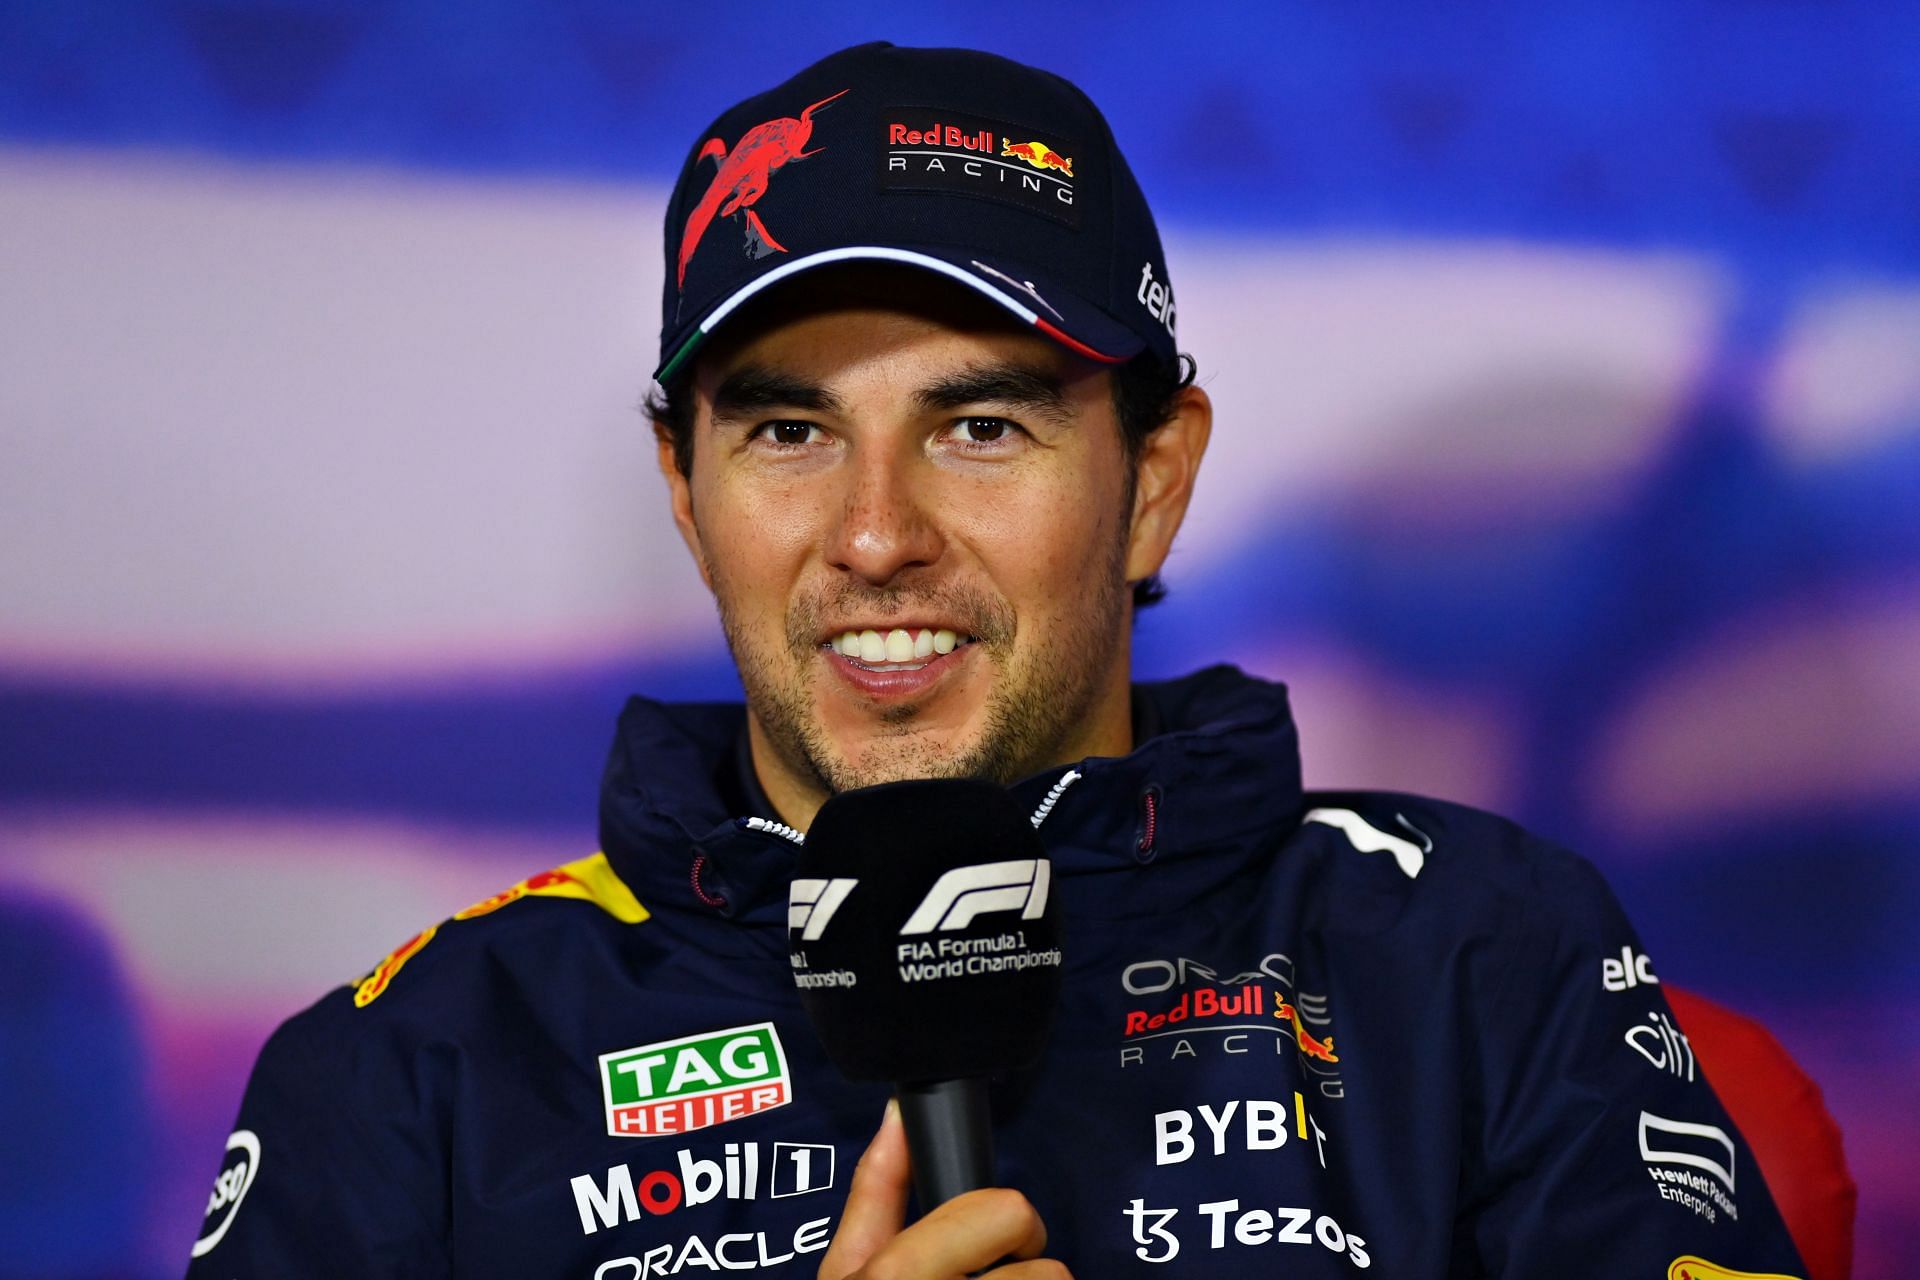 Sergio Perez speaks to the media after his P2 finish at the 2022 F1 British GP. (Photo by Dan Mullan/Getty Images)